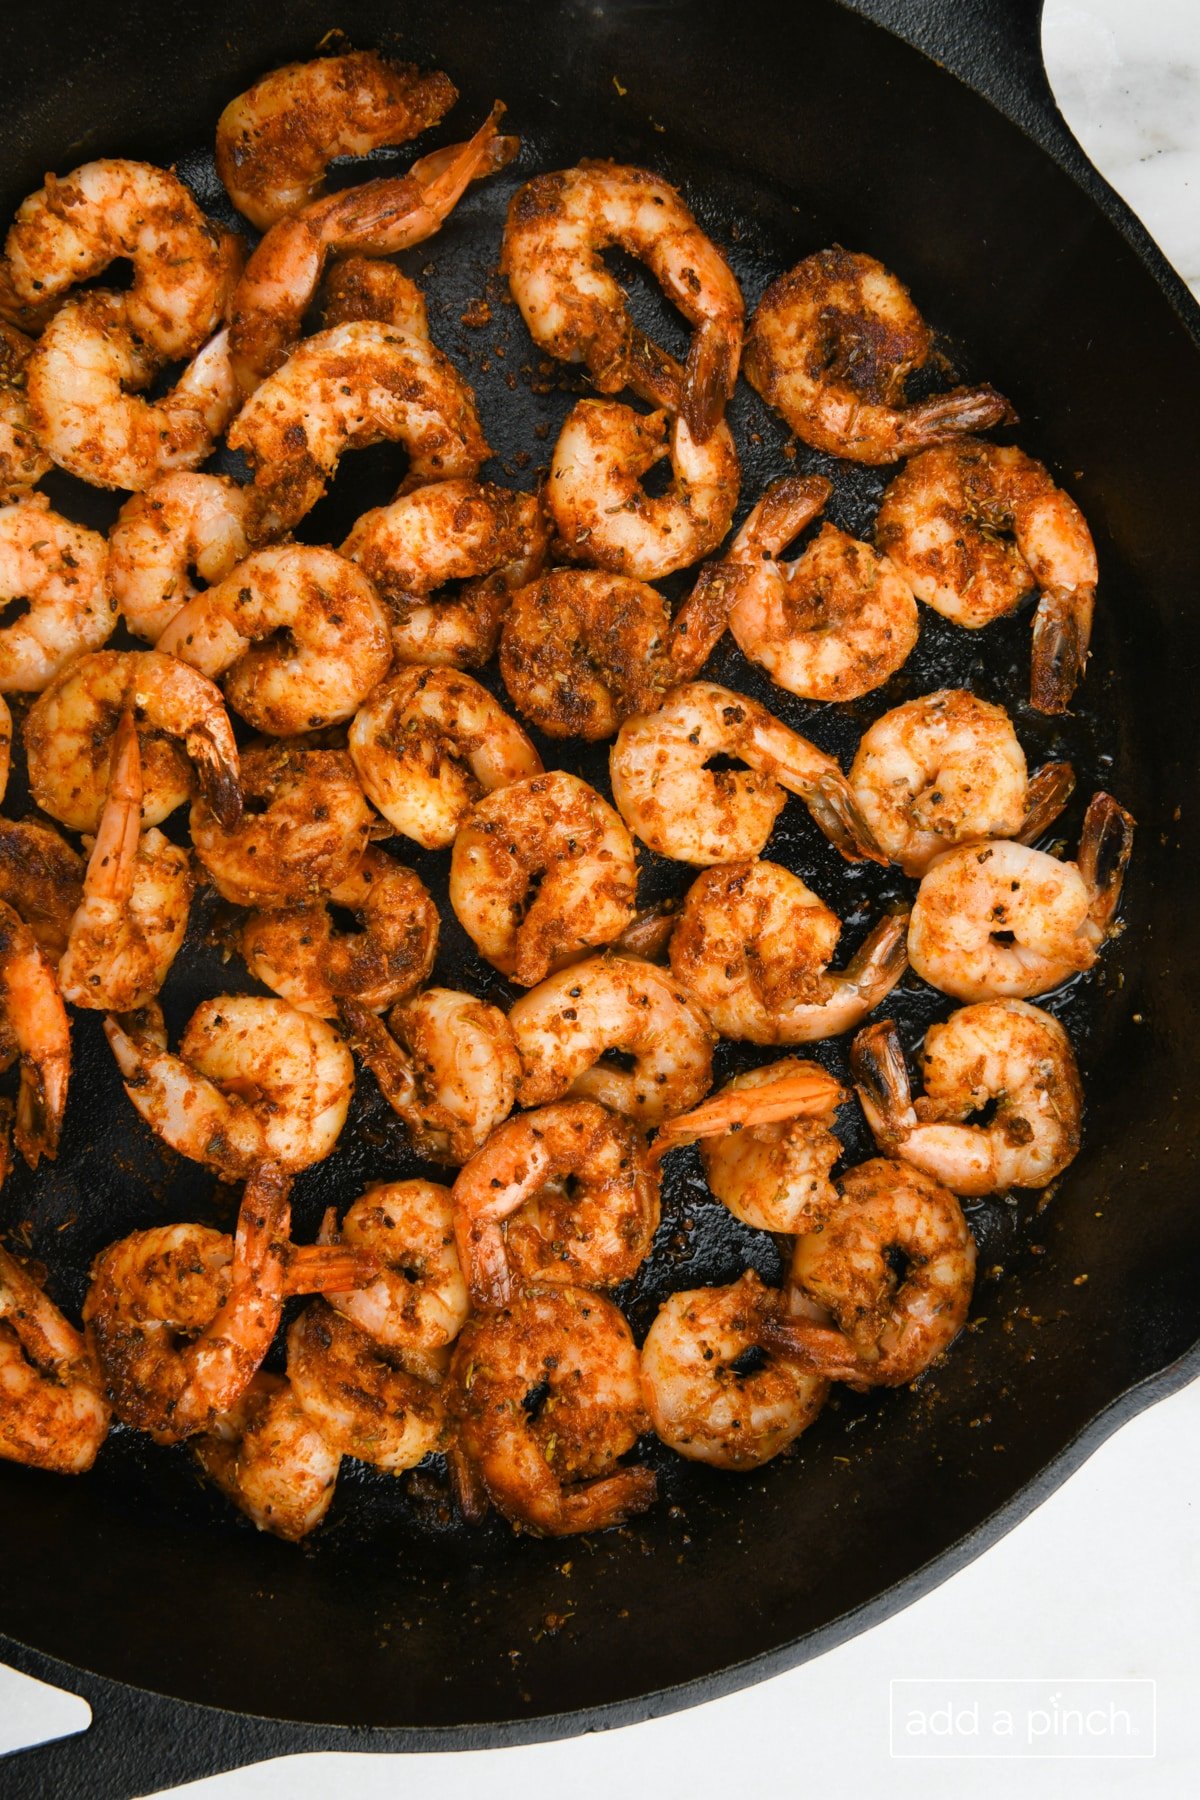 Cooked blackened shrimp in a cast iron skillet.